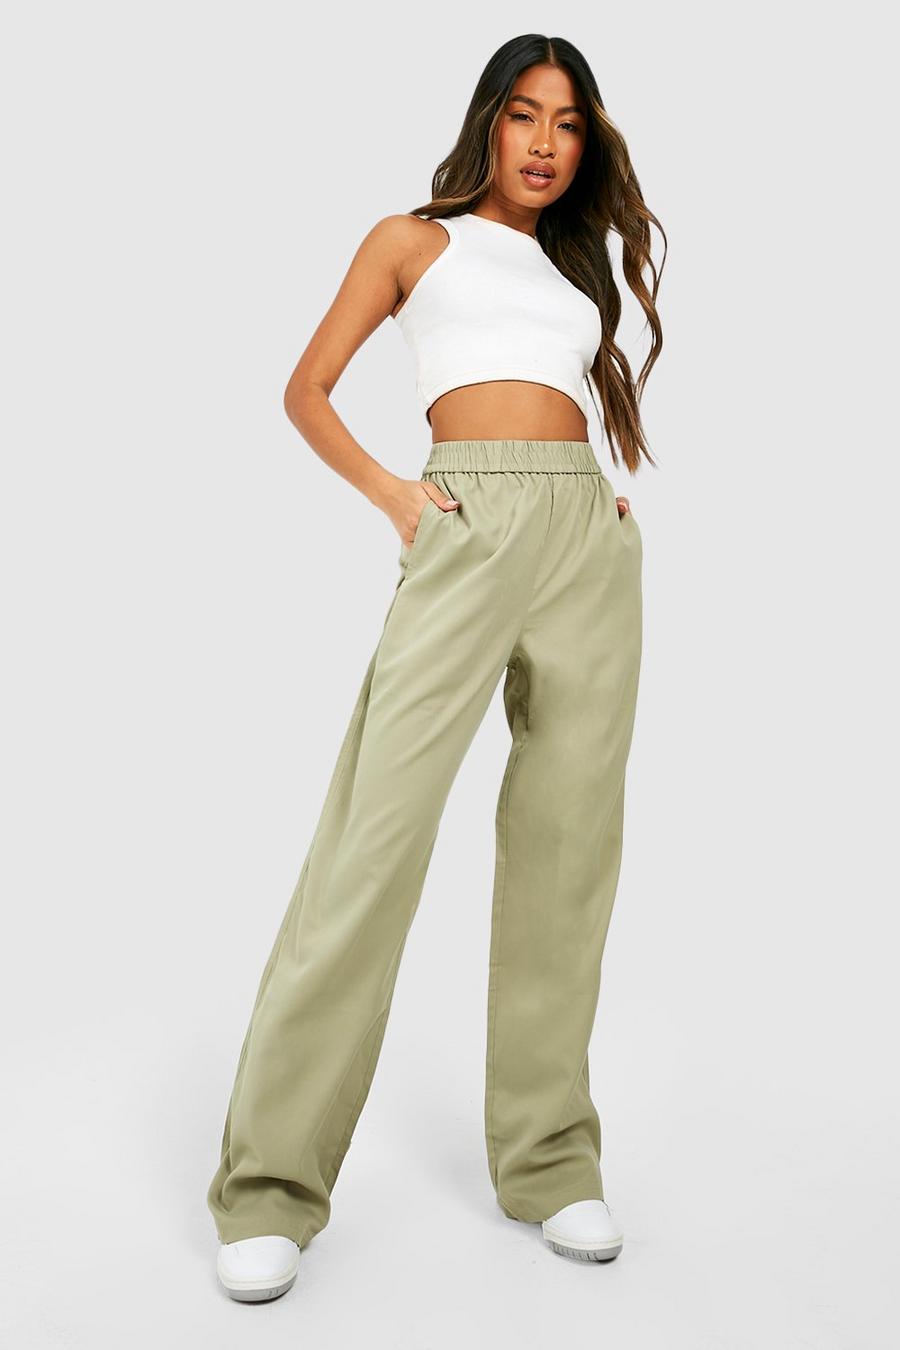 Women's Elasticated Waist Relaxed Fit Wide Leg Trousers